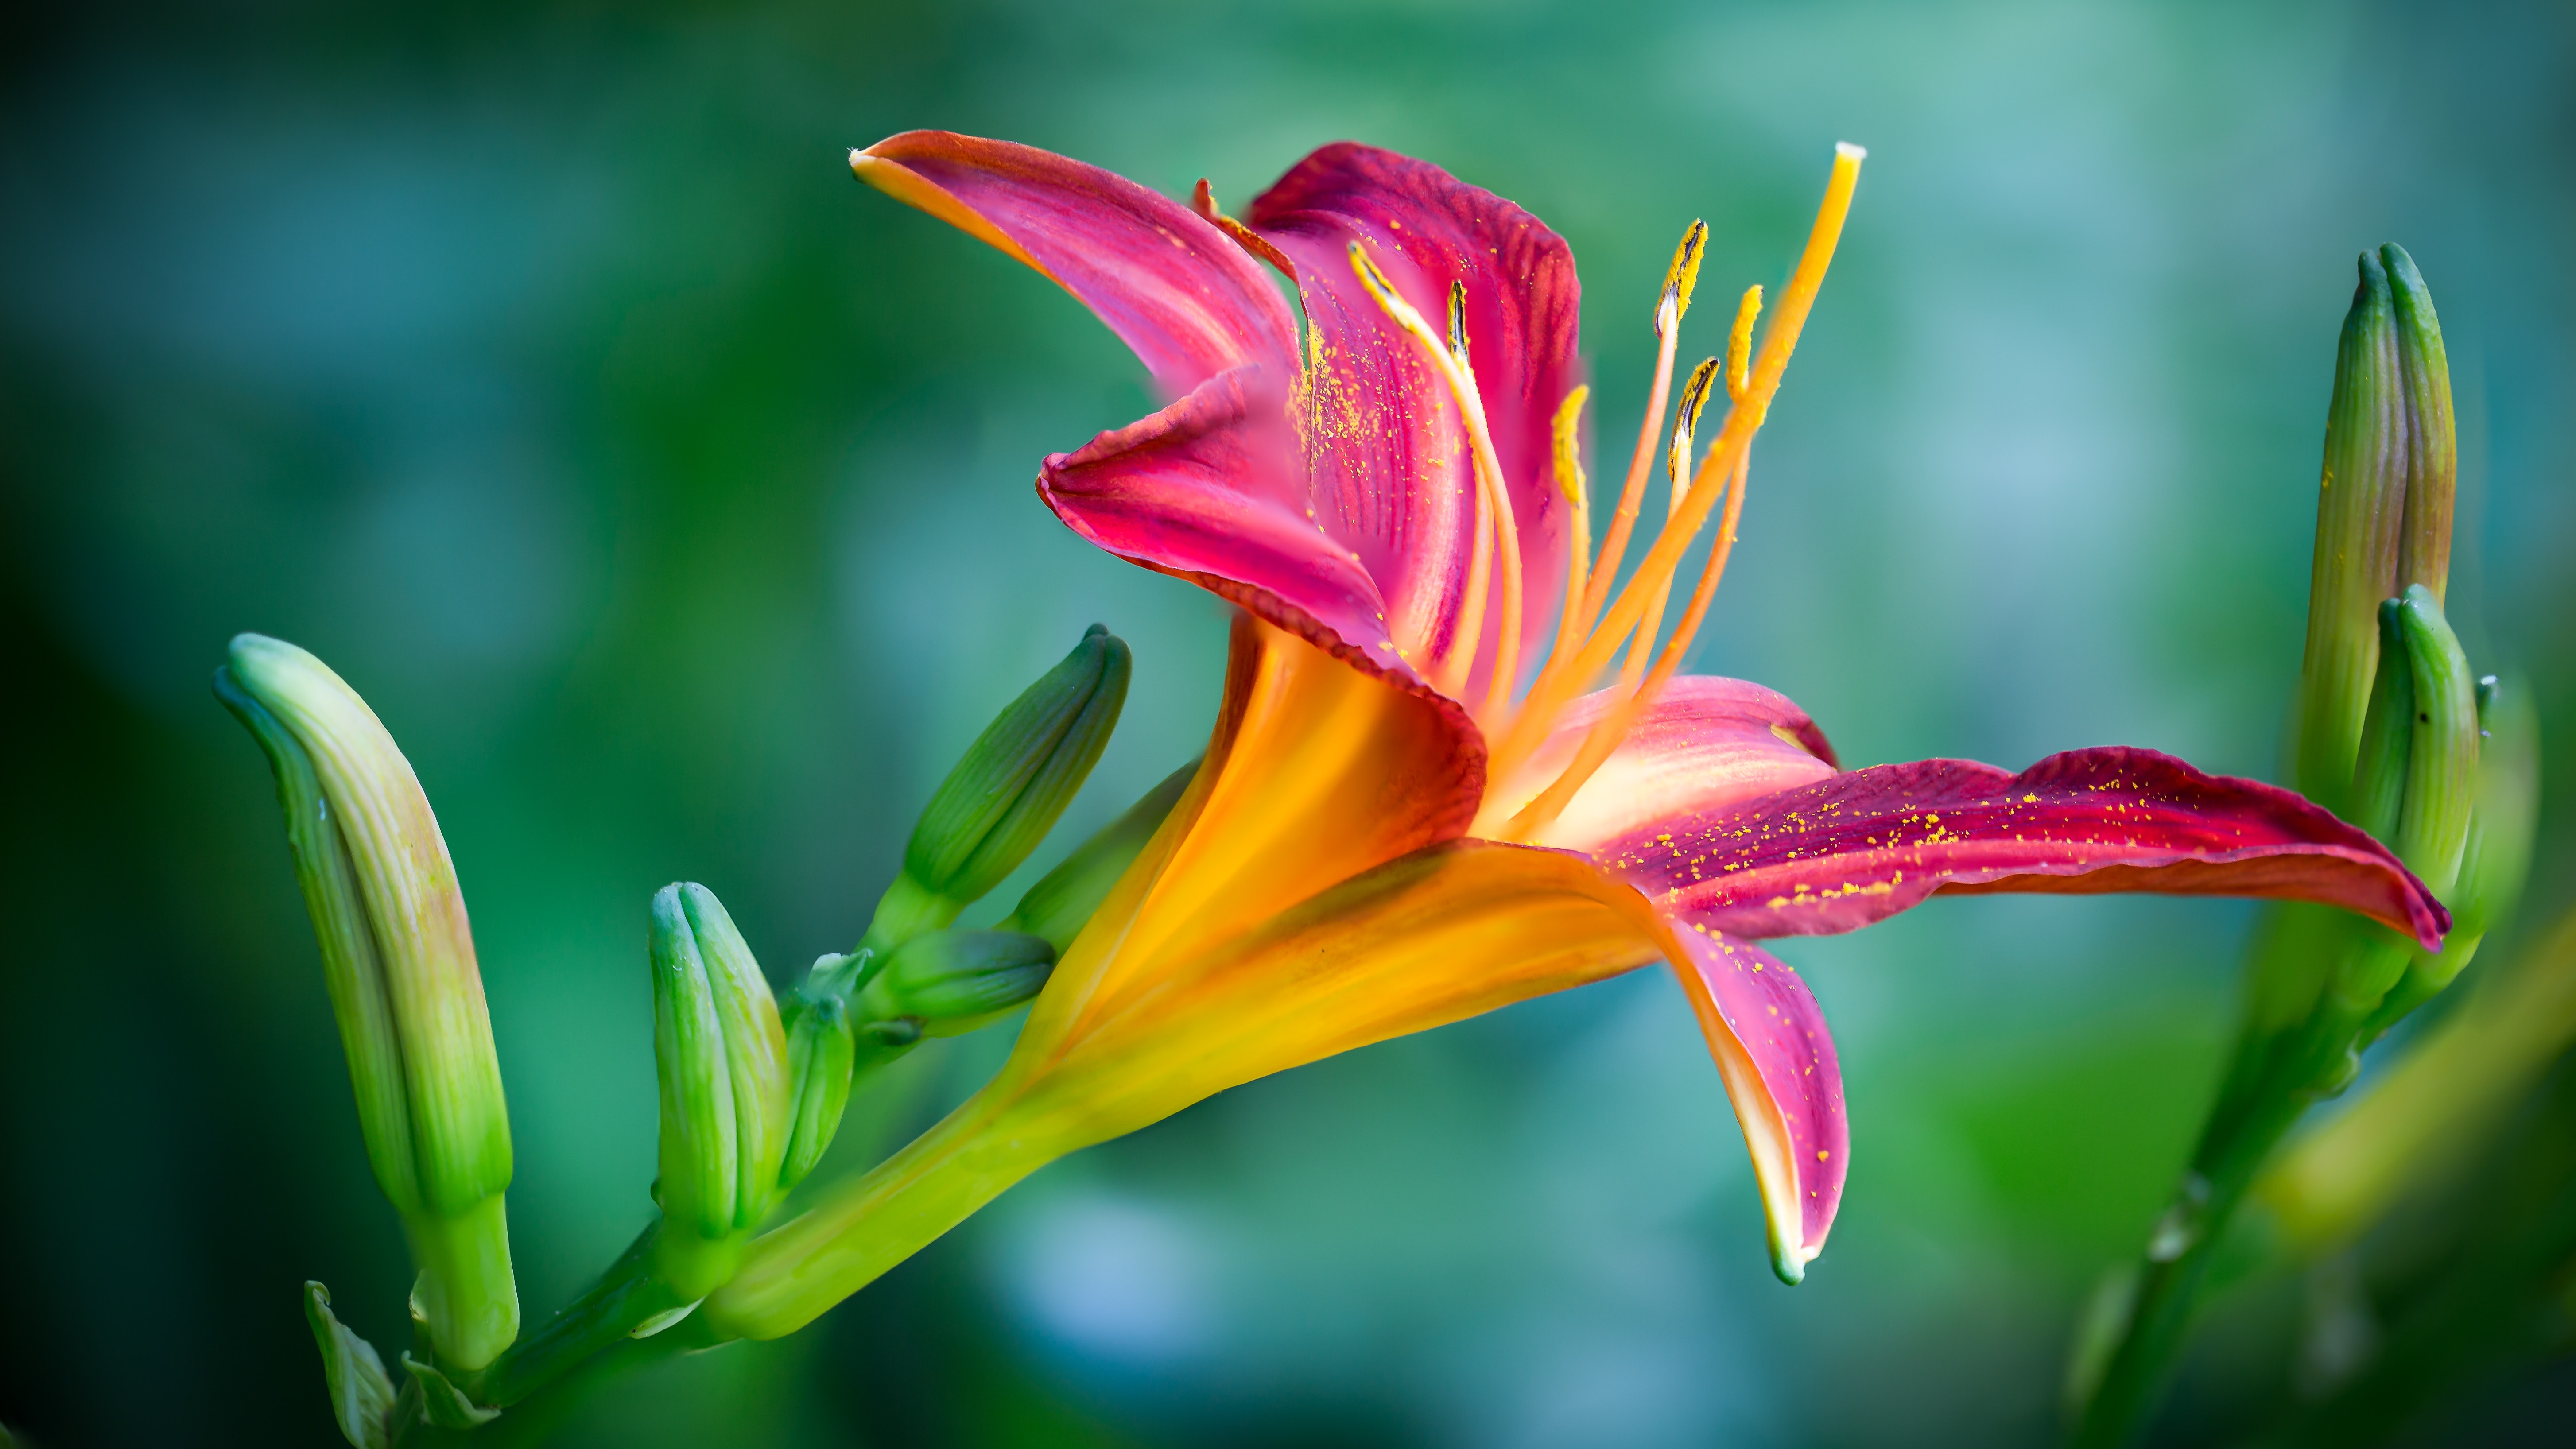 Neon Lily Beautiful Flowers Pictures Desktop Hd Wallpapers For Mobile